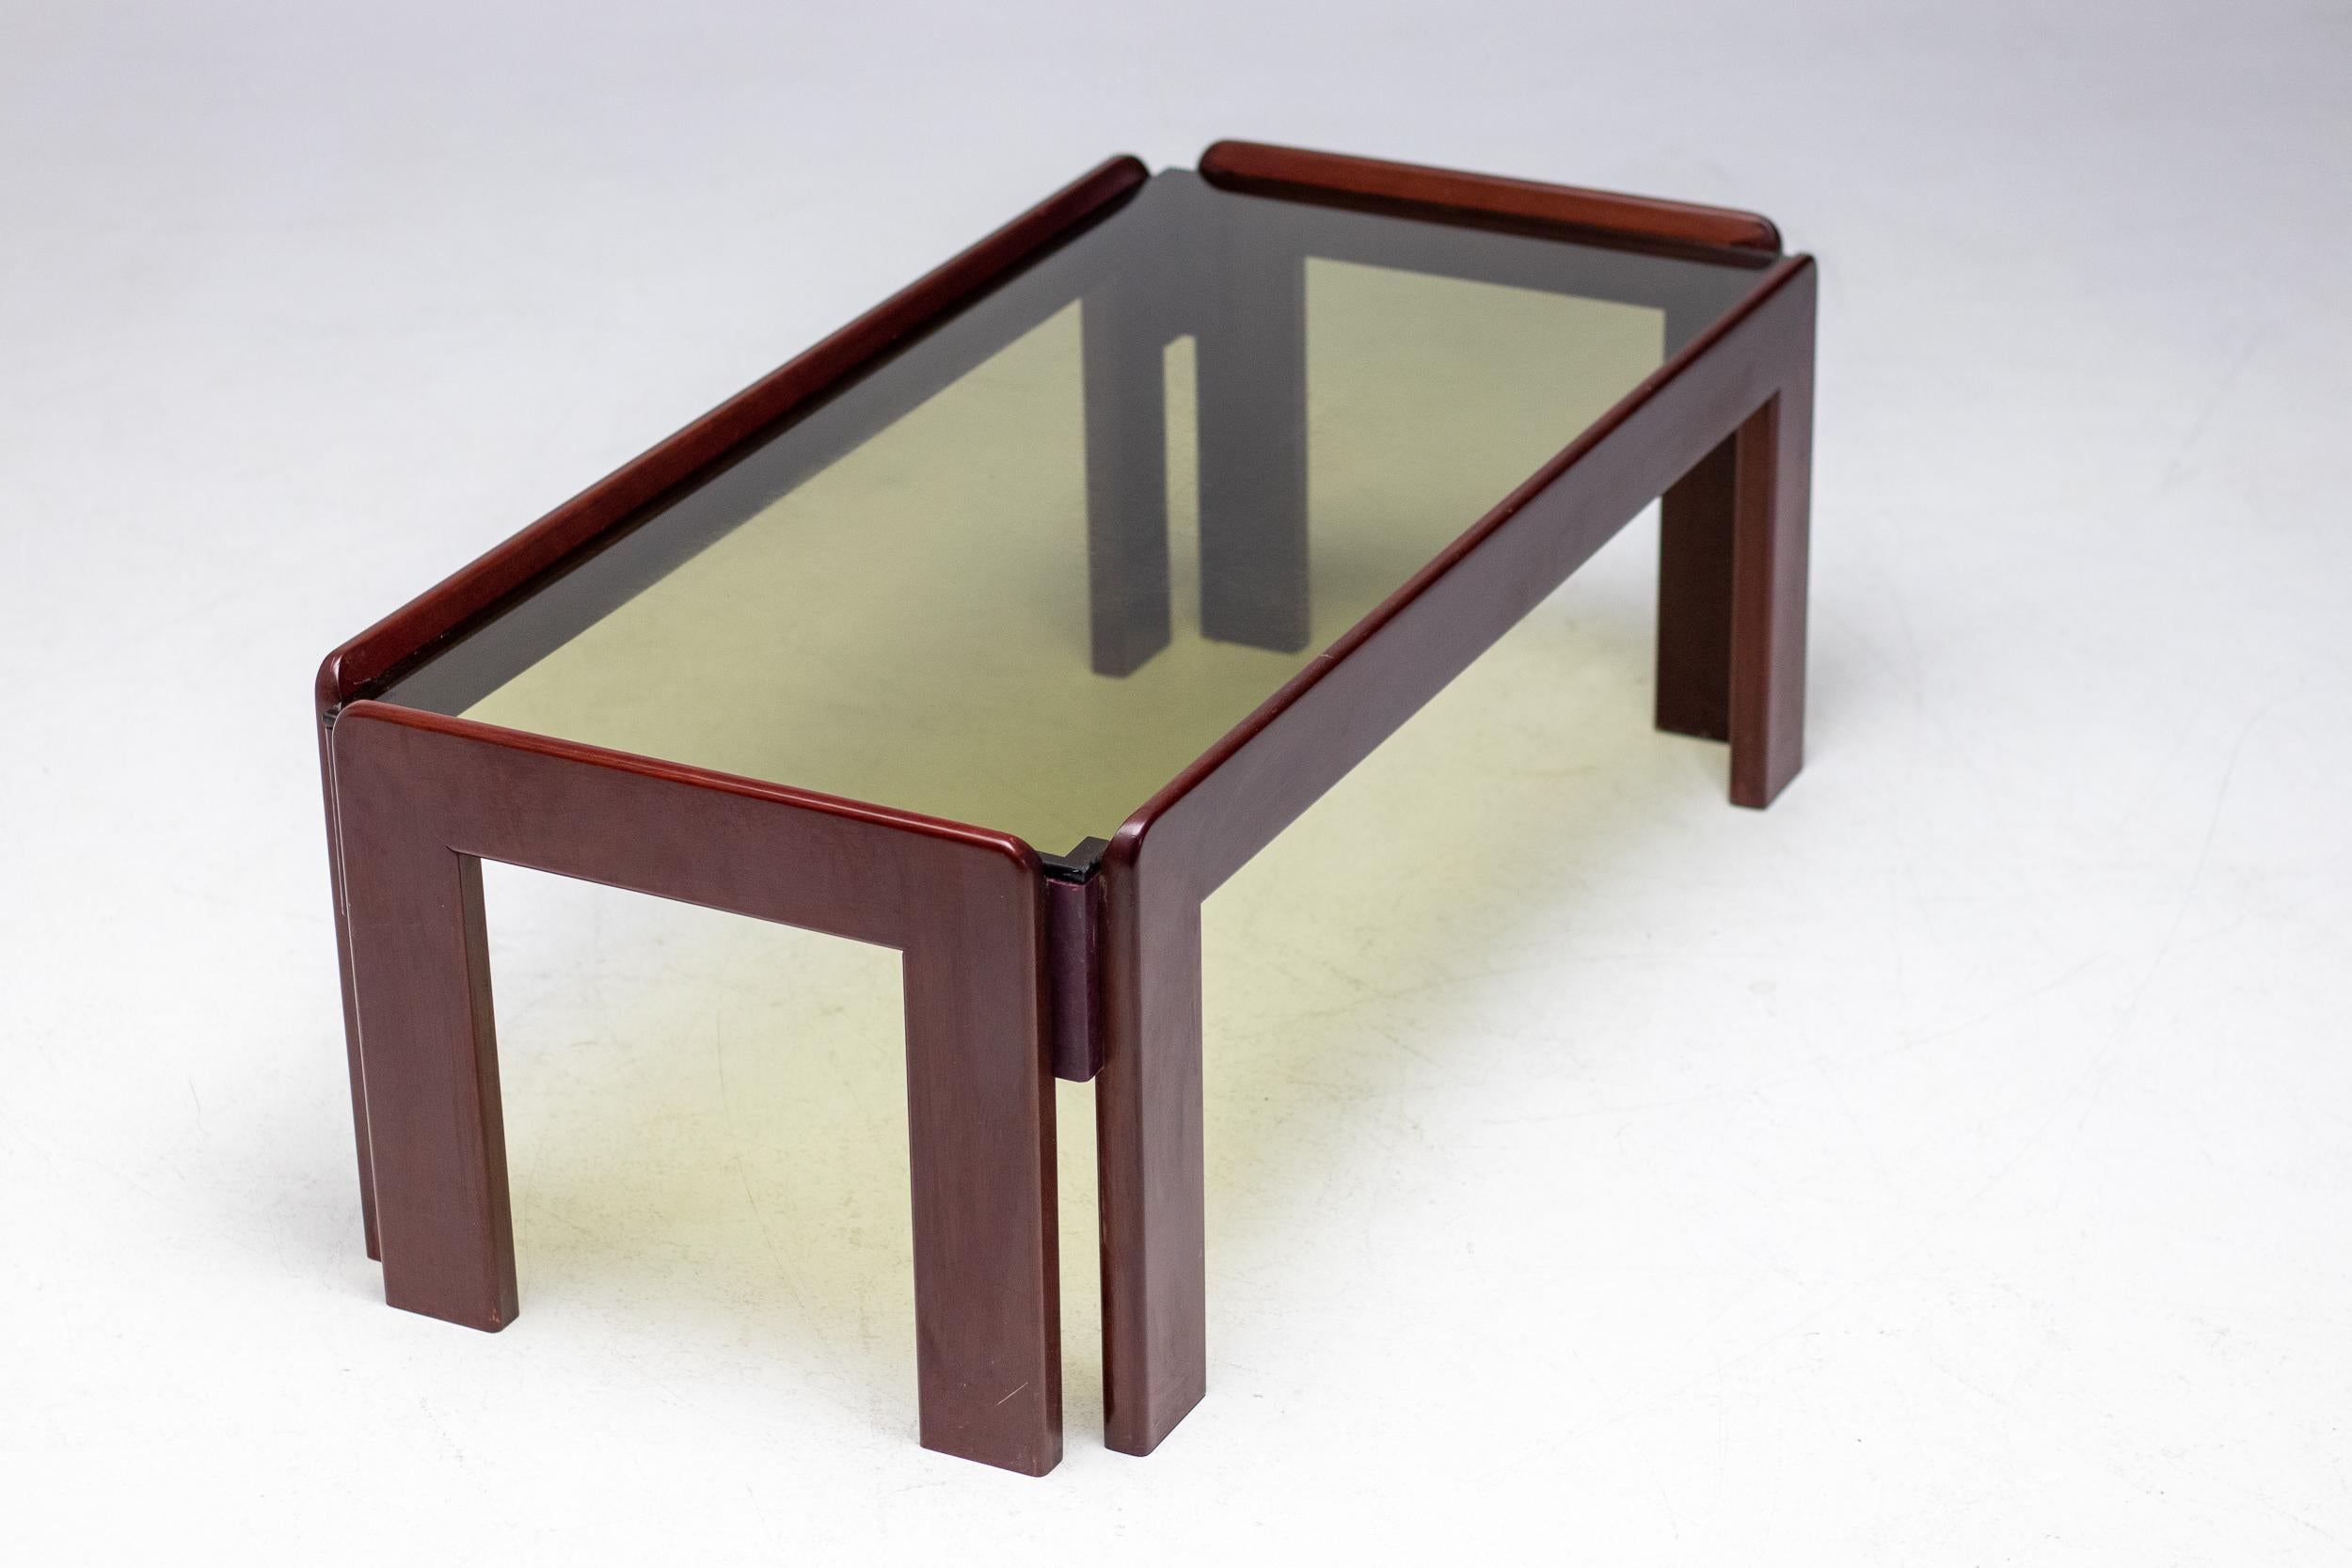 Elegant mahogany coffee table with smoked glass top designed by Afra & Tobia Scarpa for Cassina. 

Chic, distinctive, and cool, the work of husband-and-wife-team Tobia and Afra Scarpa has found a new generation of sophisticated admirers in the 21st